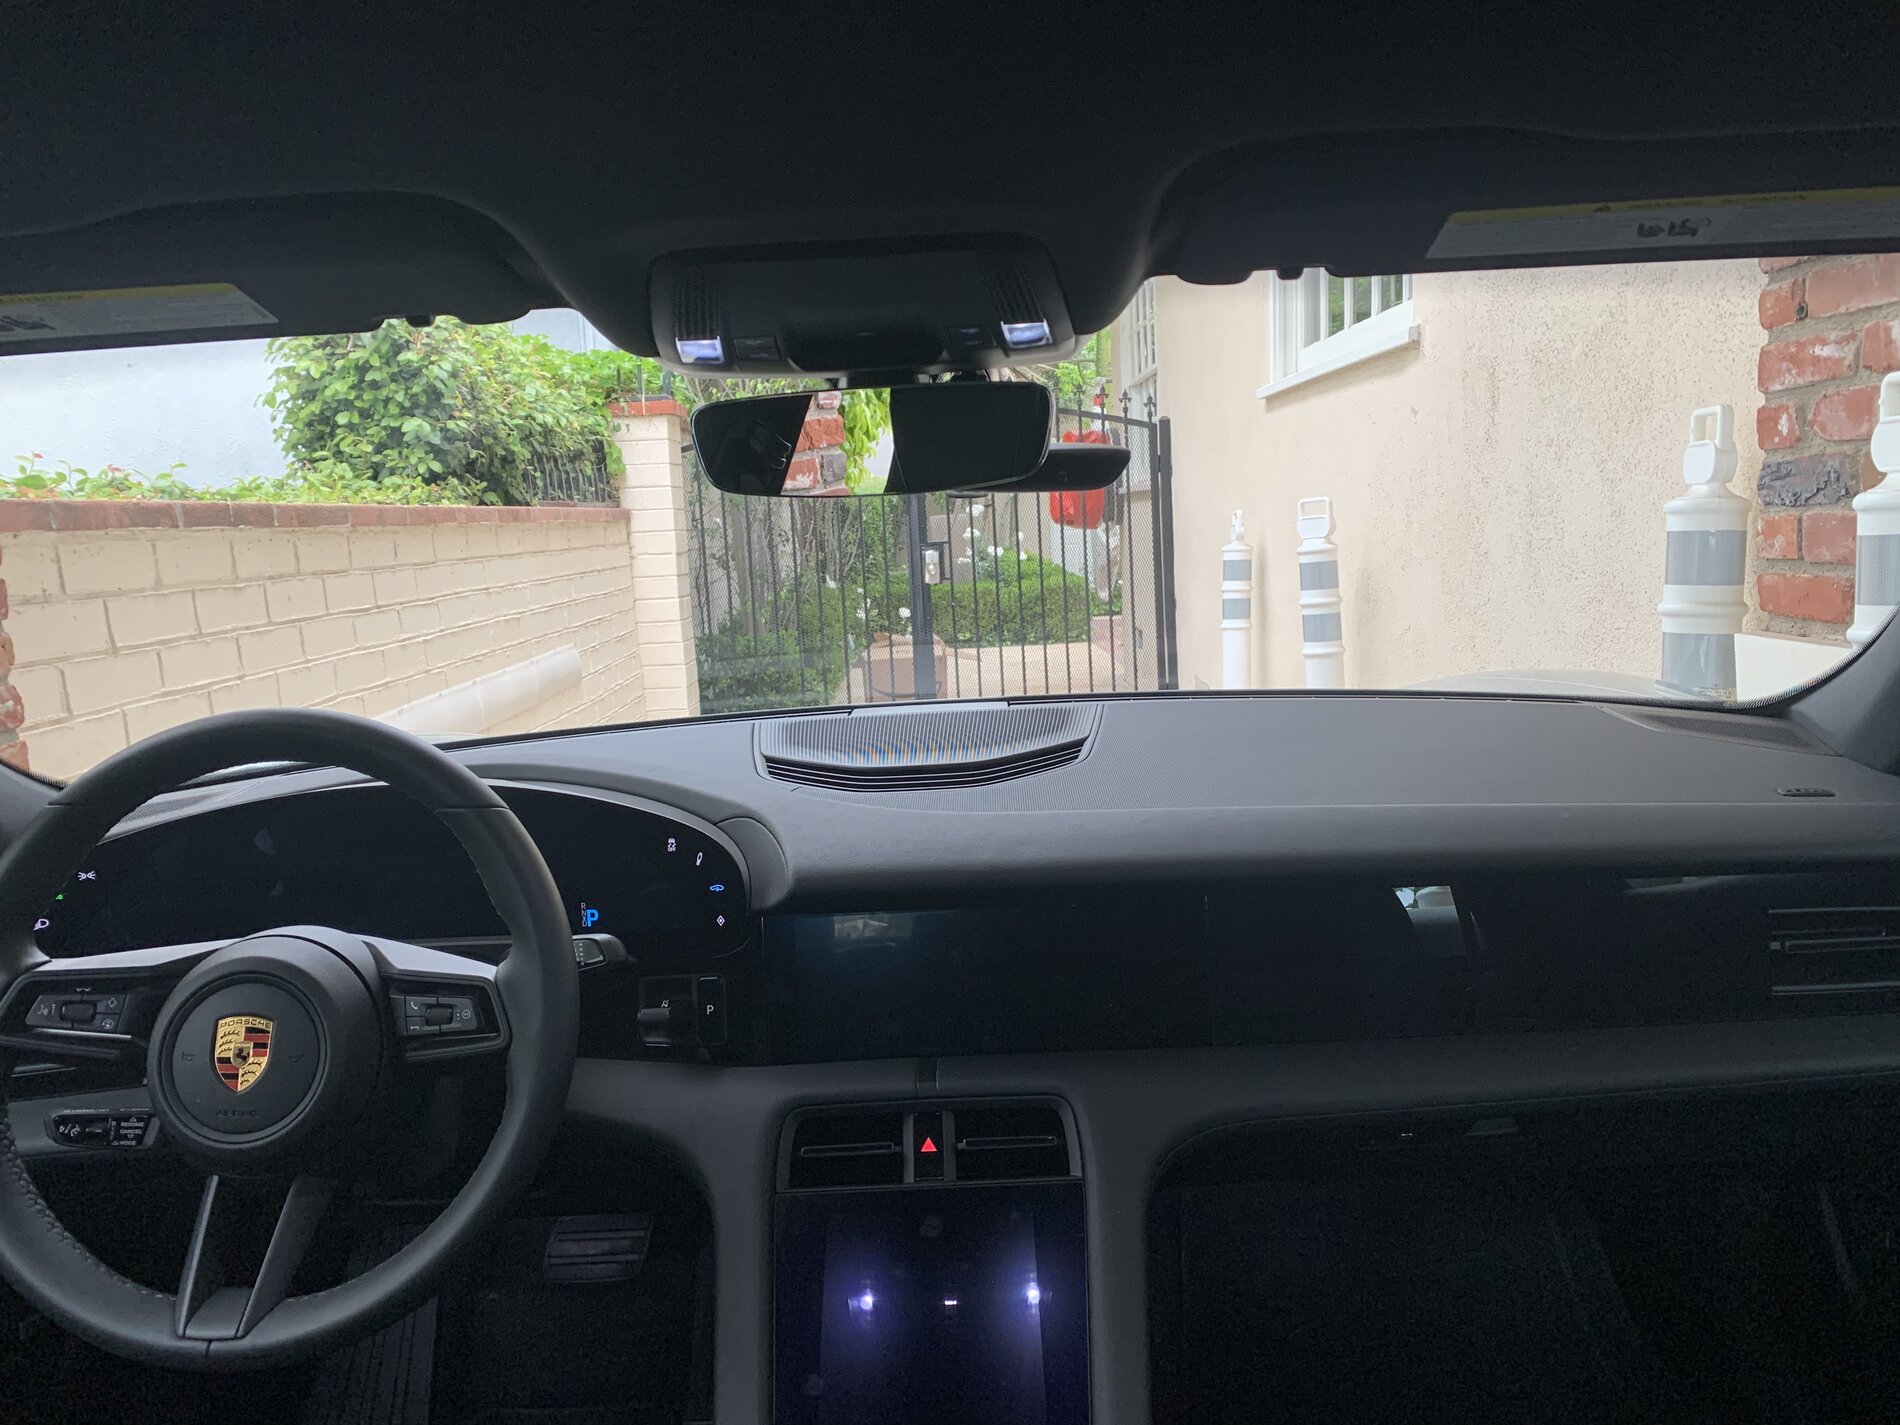 Porsche Taycan Porsche Dashcam Installed - Review and Overview for US Taycan Owners 16346C2C-6552-4C71-BA0D-7283182447B0